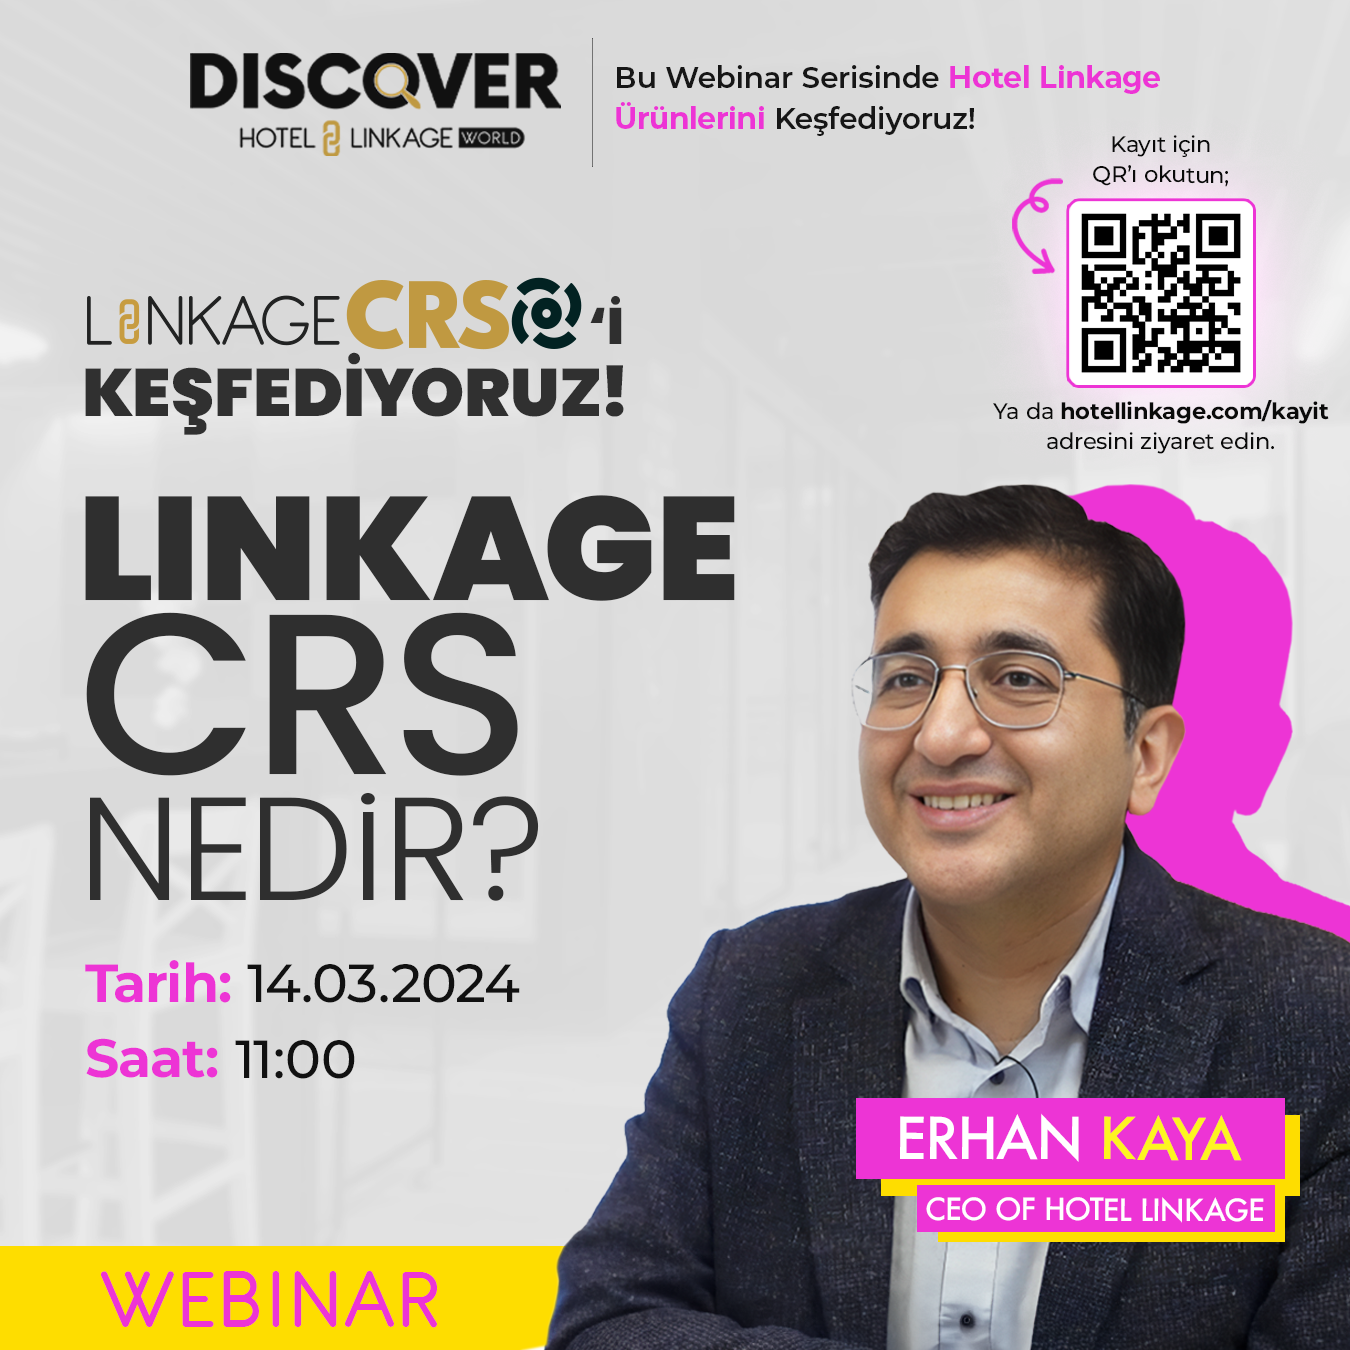 Promotional poster for the 'Discover Hotel Linkage' webinar scheduled for March 14, 2024, at 8:00 PM. The poster features a photo of Erhan Kaya, CEO of Hotel Linkage, along with the event title 'WHAT IS LINKAGE CRS?', registration information, and a QR code.